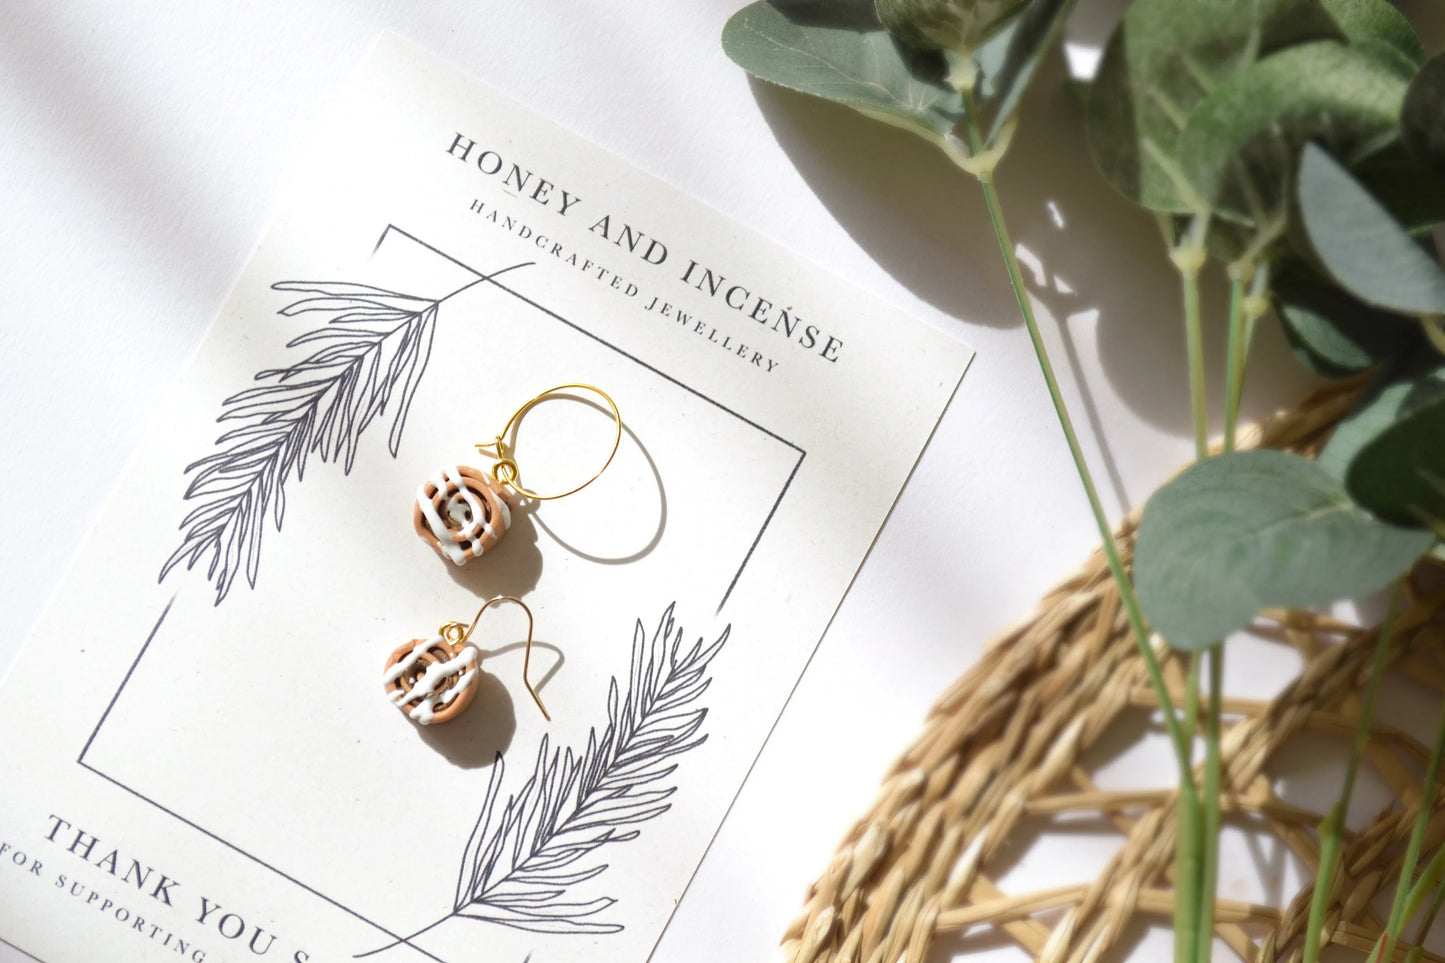 Small cinnamon bun earrings sitting on a Honey and Incense branded thank you note, with some eucalyptus leaves on the right hand side, framing the photograph.